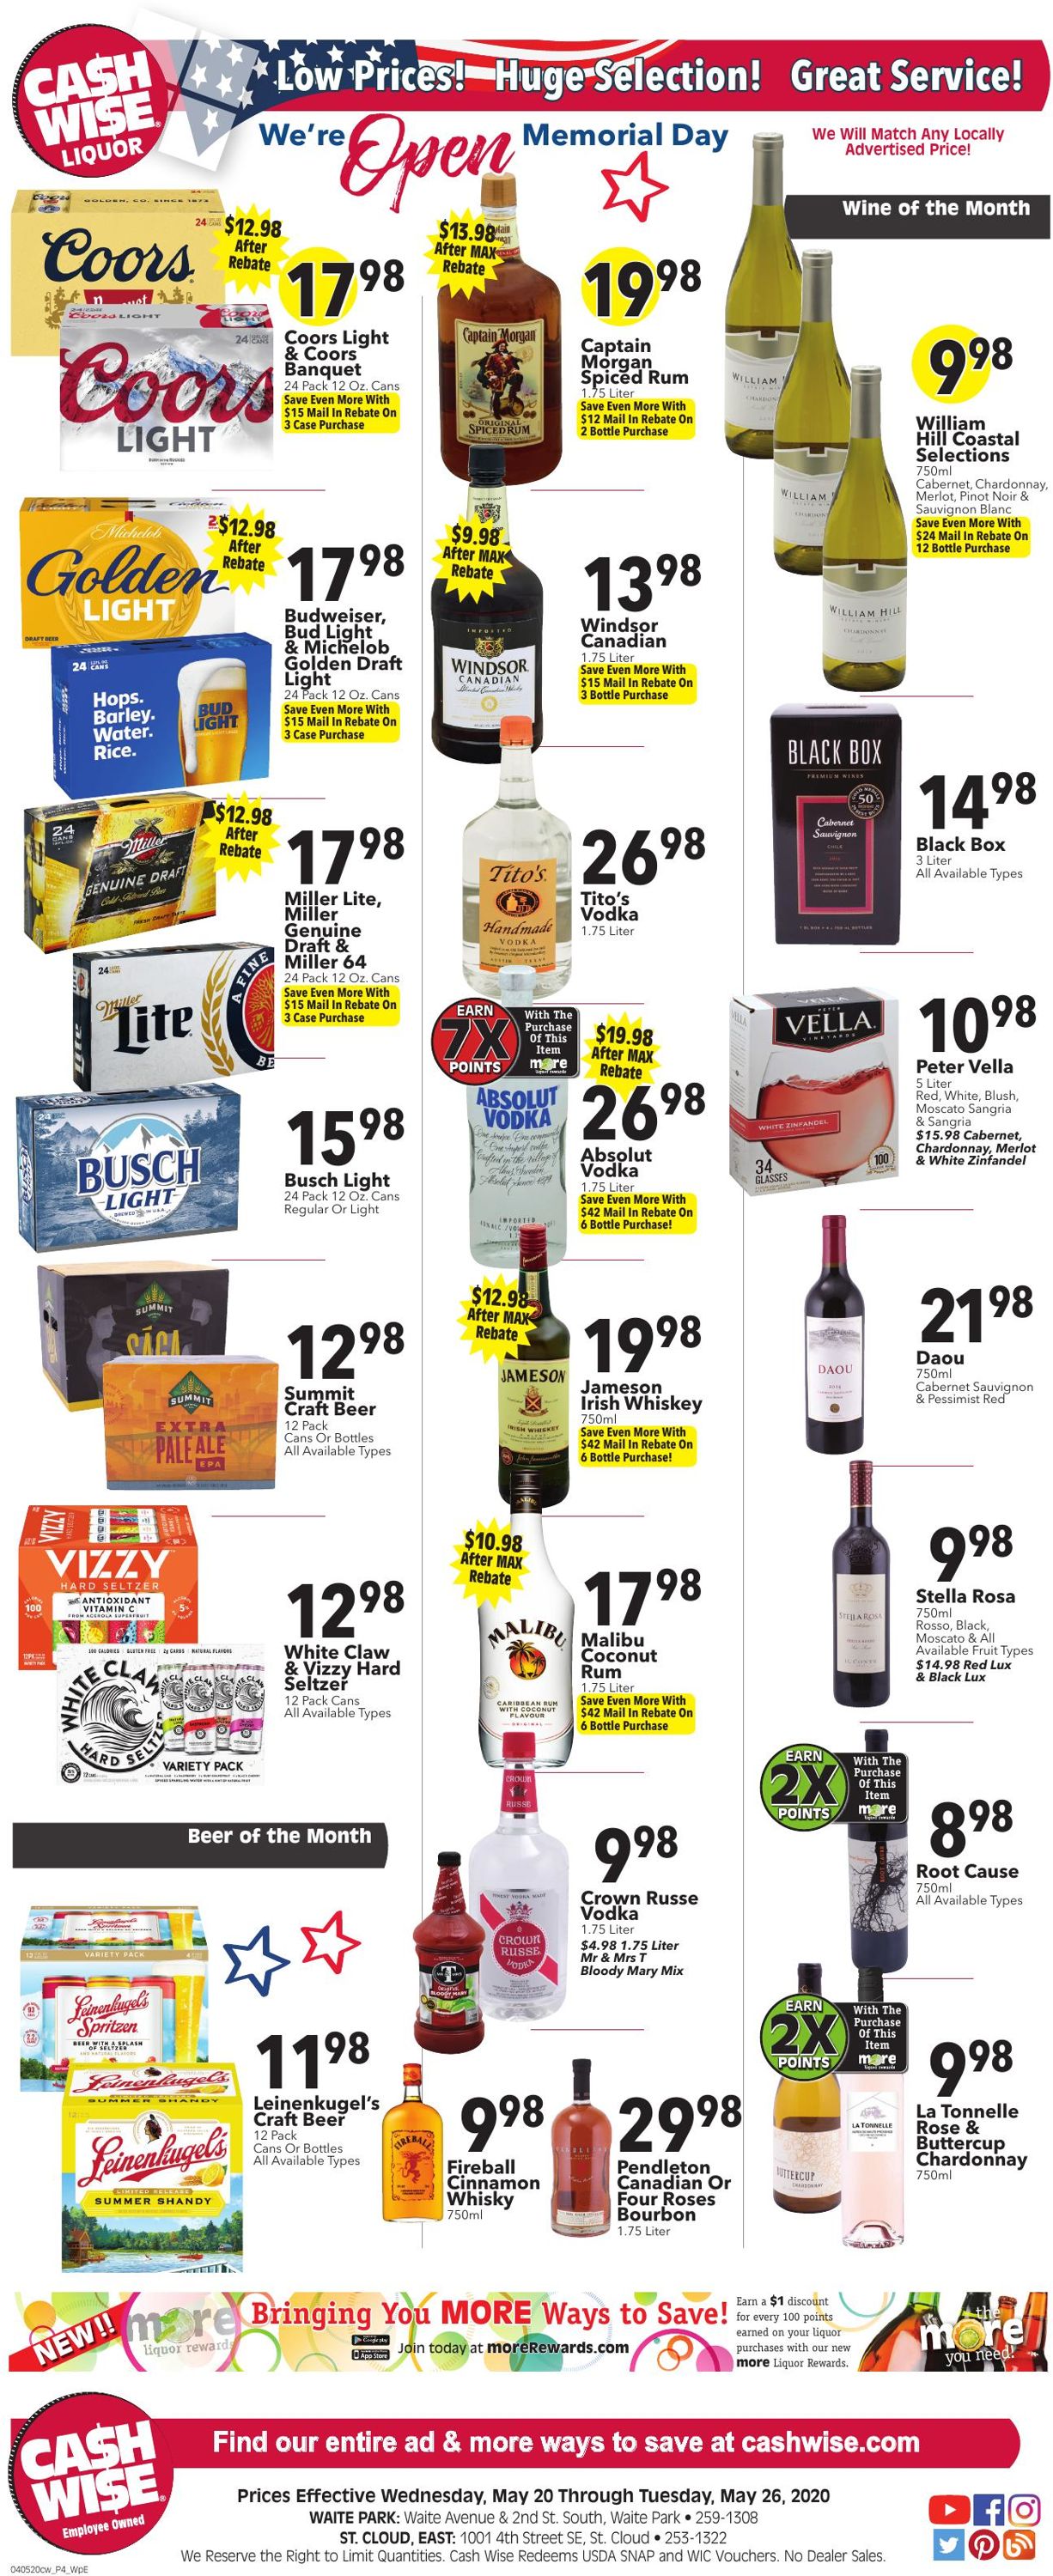 Cash Wise Weekly Ad Circular - valid 05/20-05/26/2020 (Page 6)